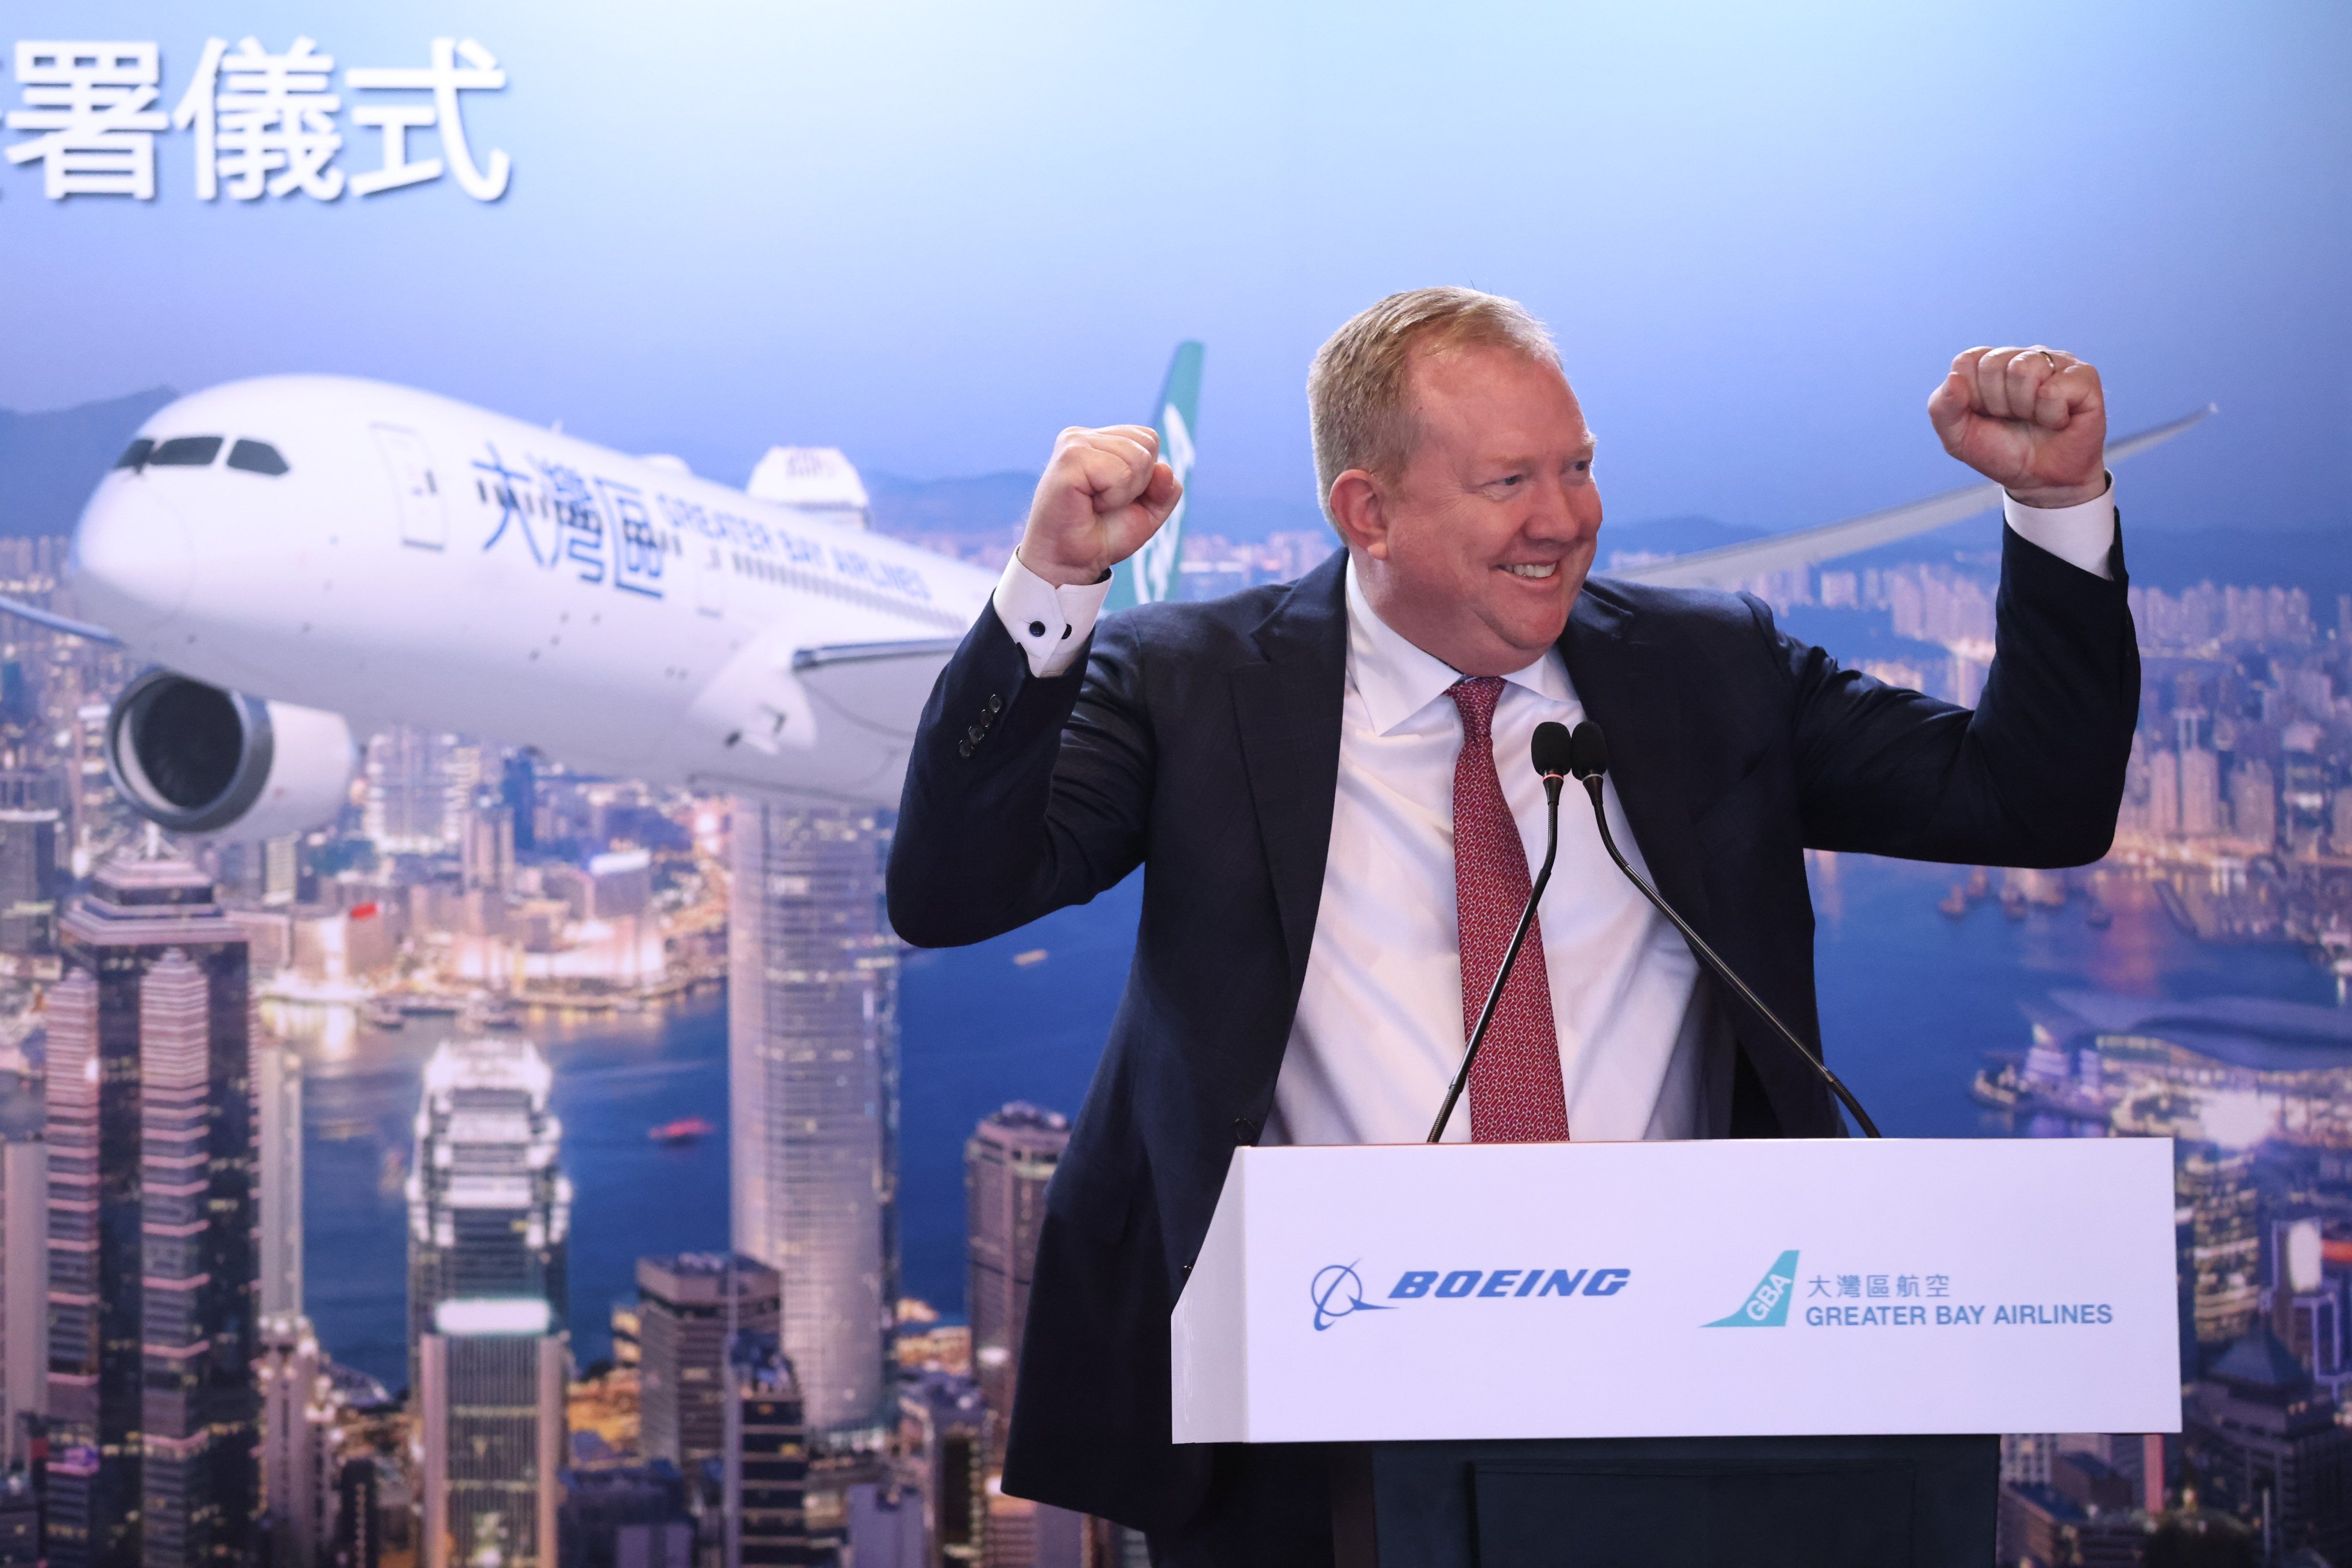 Stanley Deal of Boeing Commercial Airplanes shows his joy over the deal with Greater Bay Airlines. Photo: K. Y. Cheng